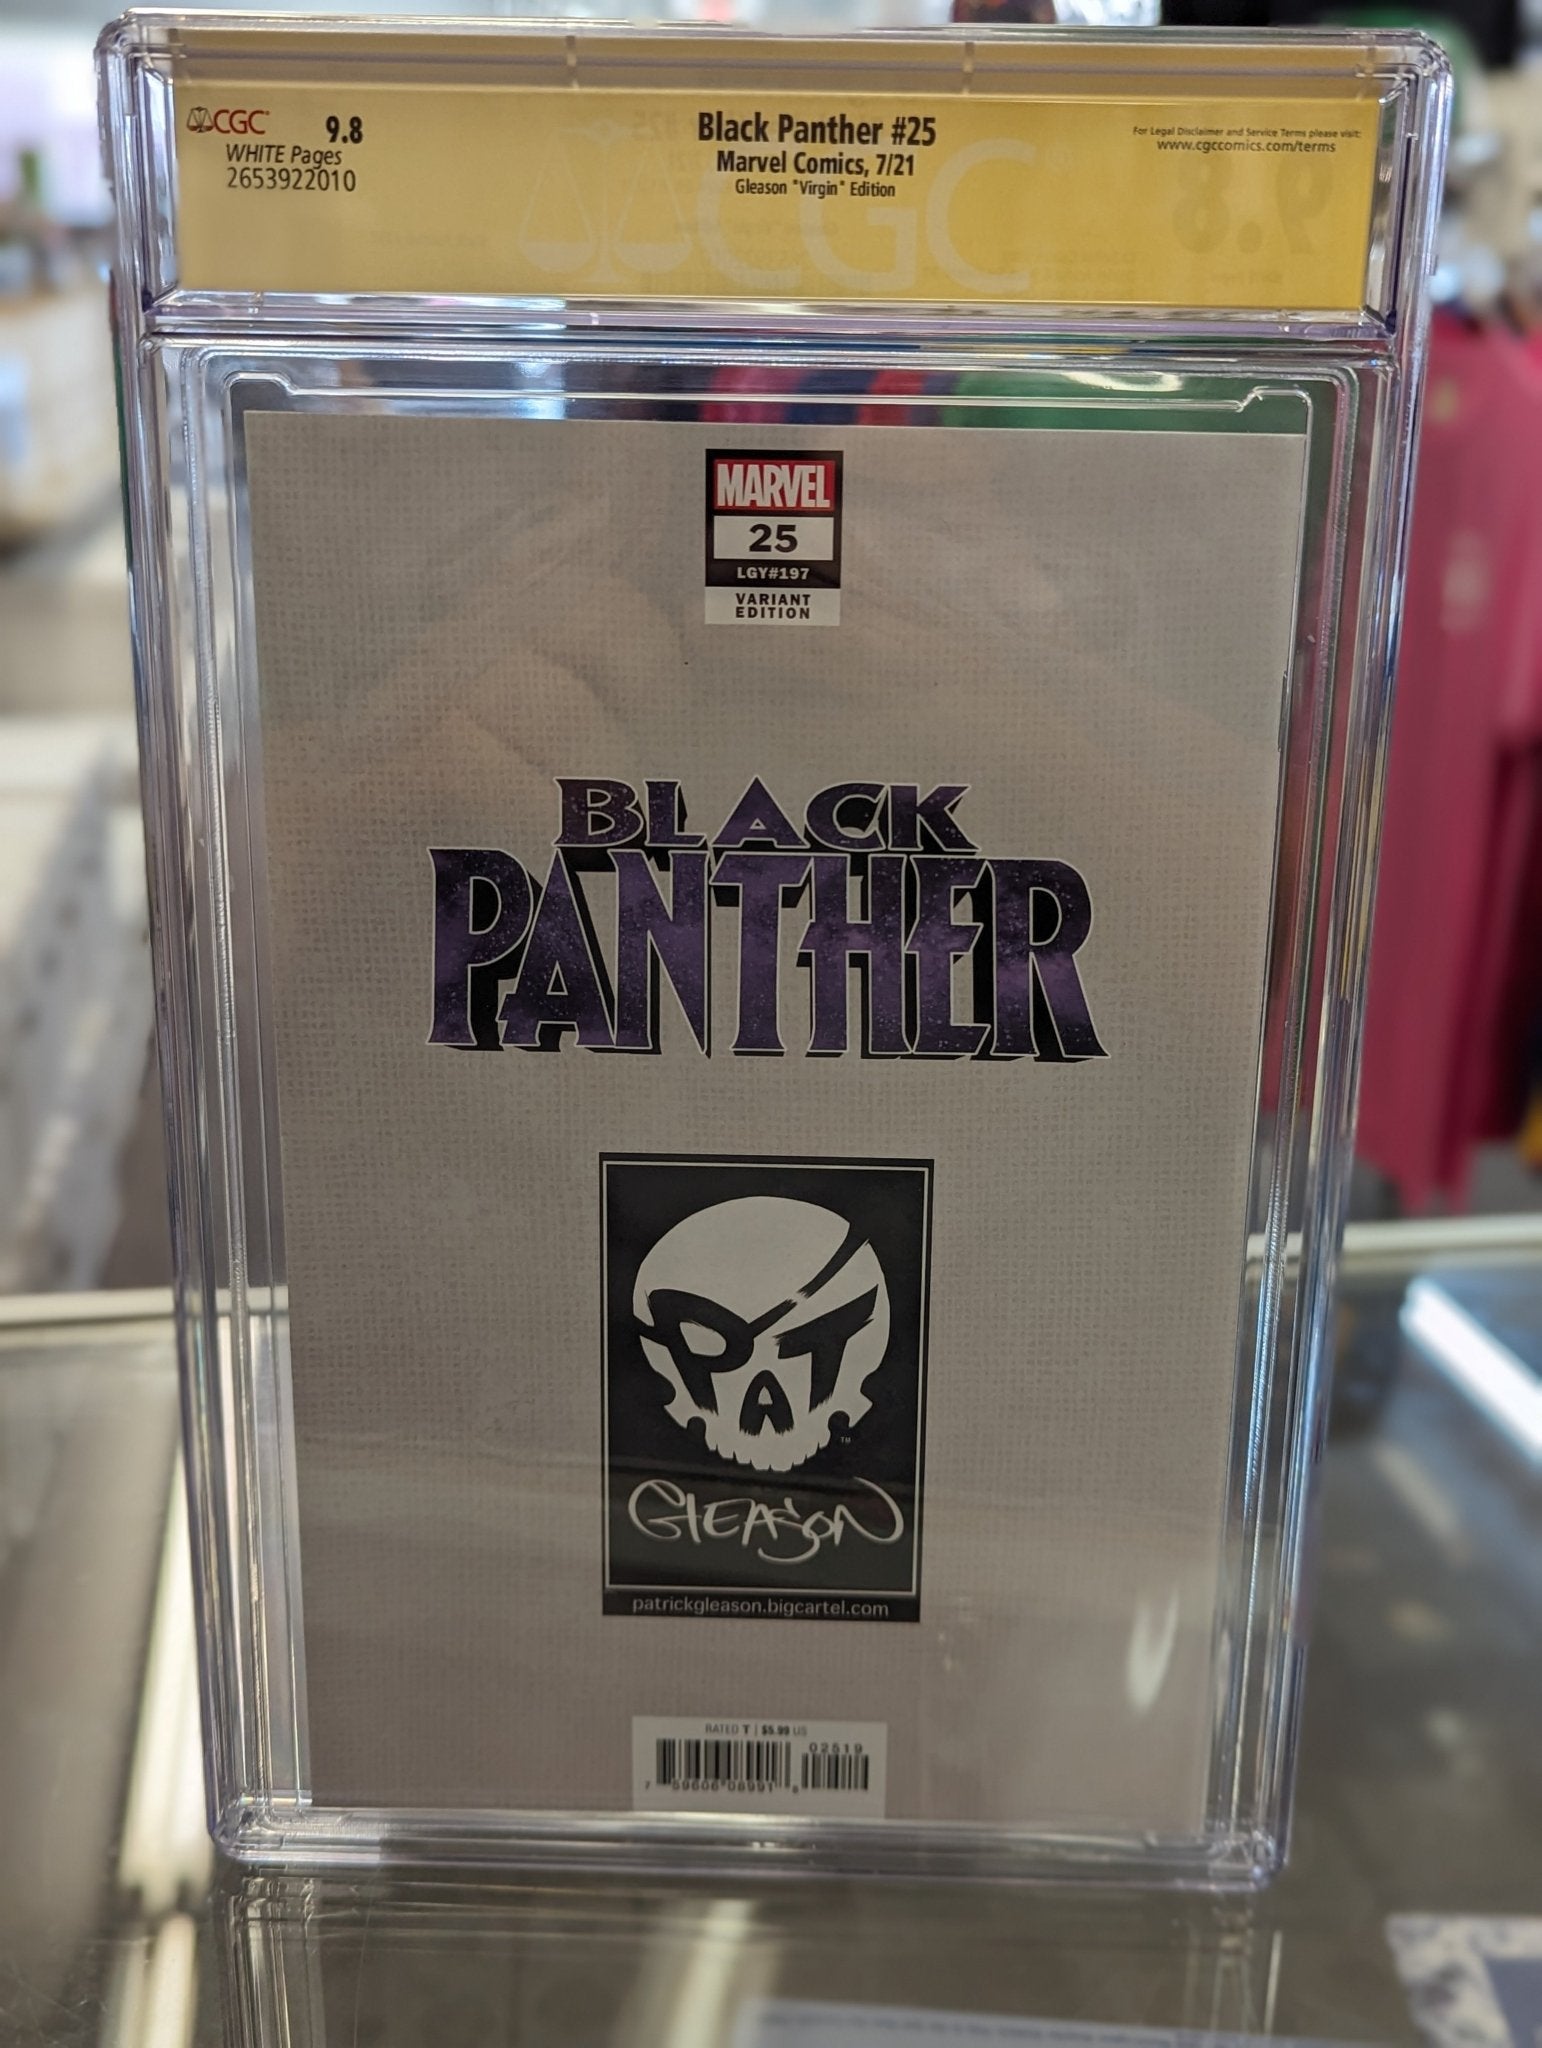 Black Panther #25 (Gleason Variant) CGC Signature Series 9.8 Signed by Patrick Gleason - Covert Comics and Collectibles